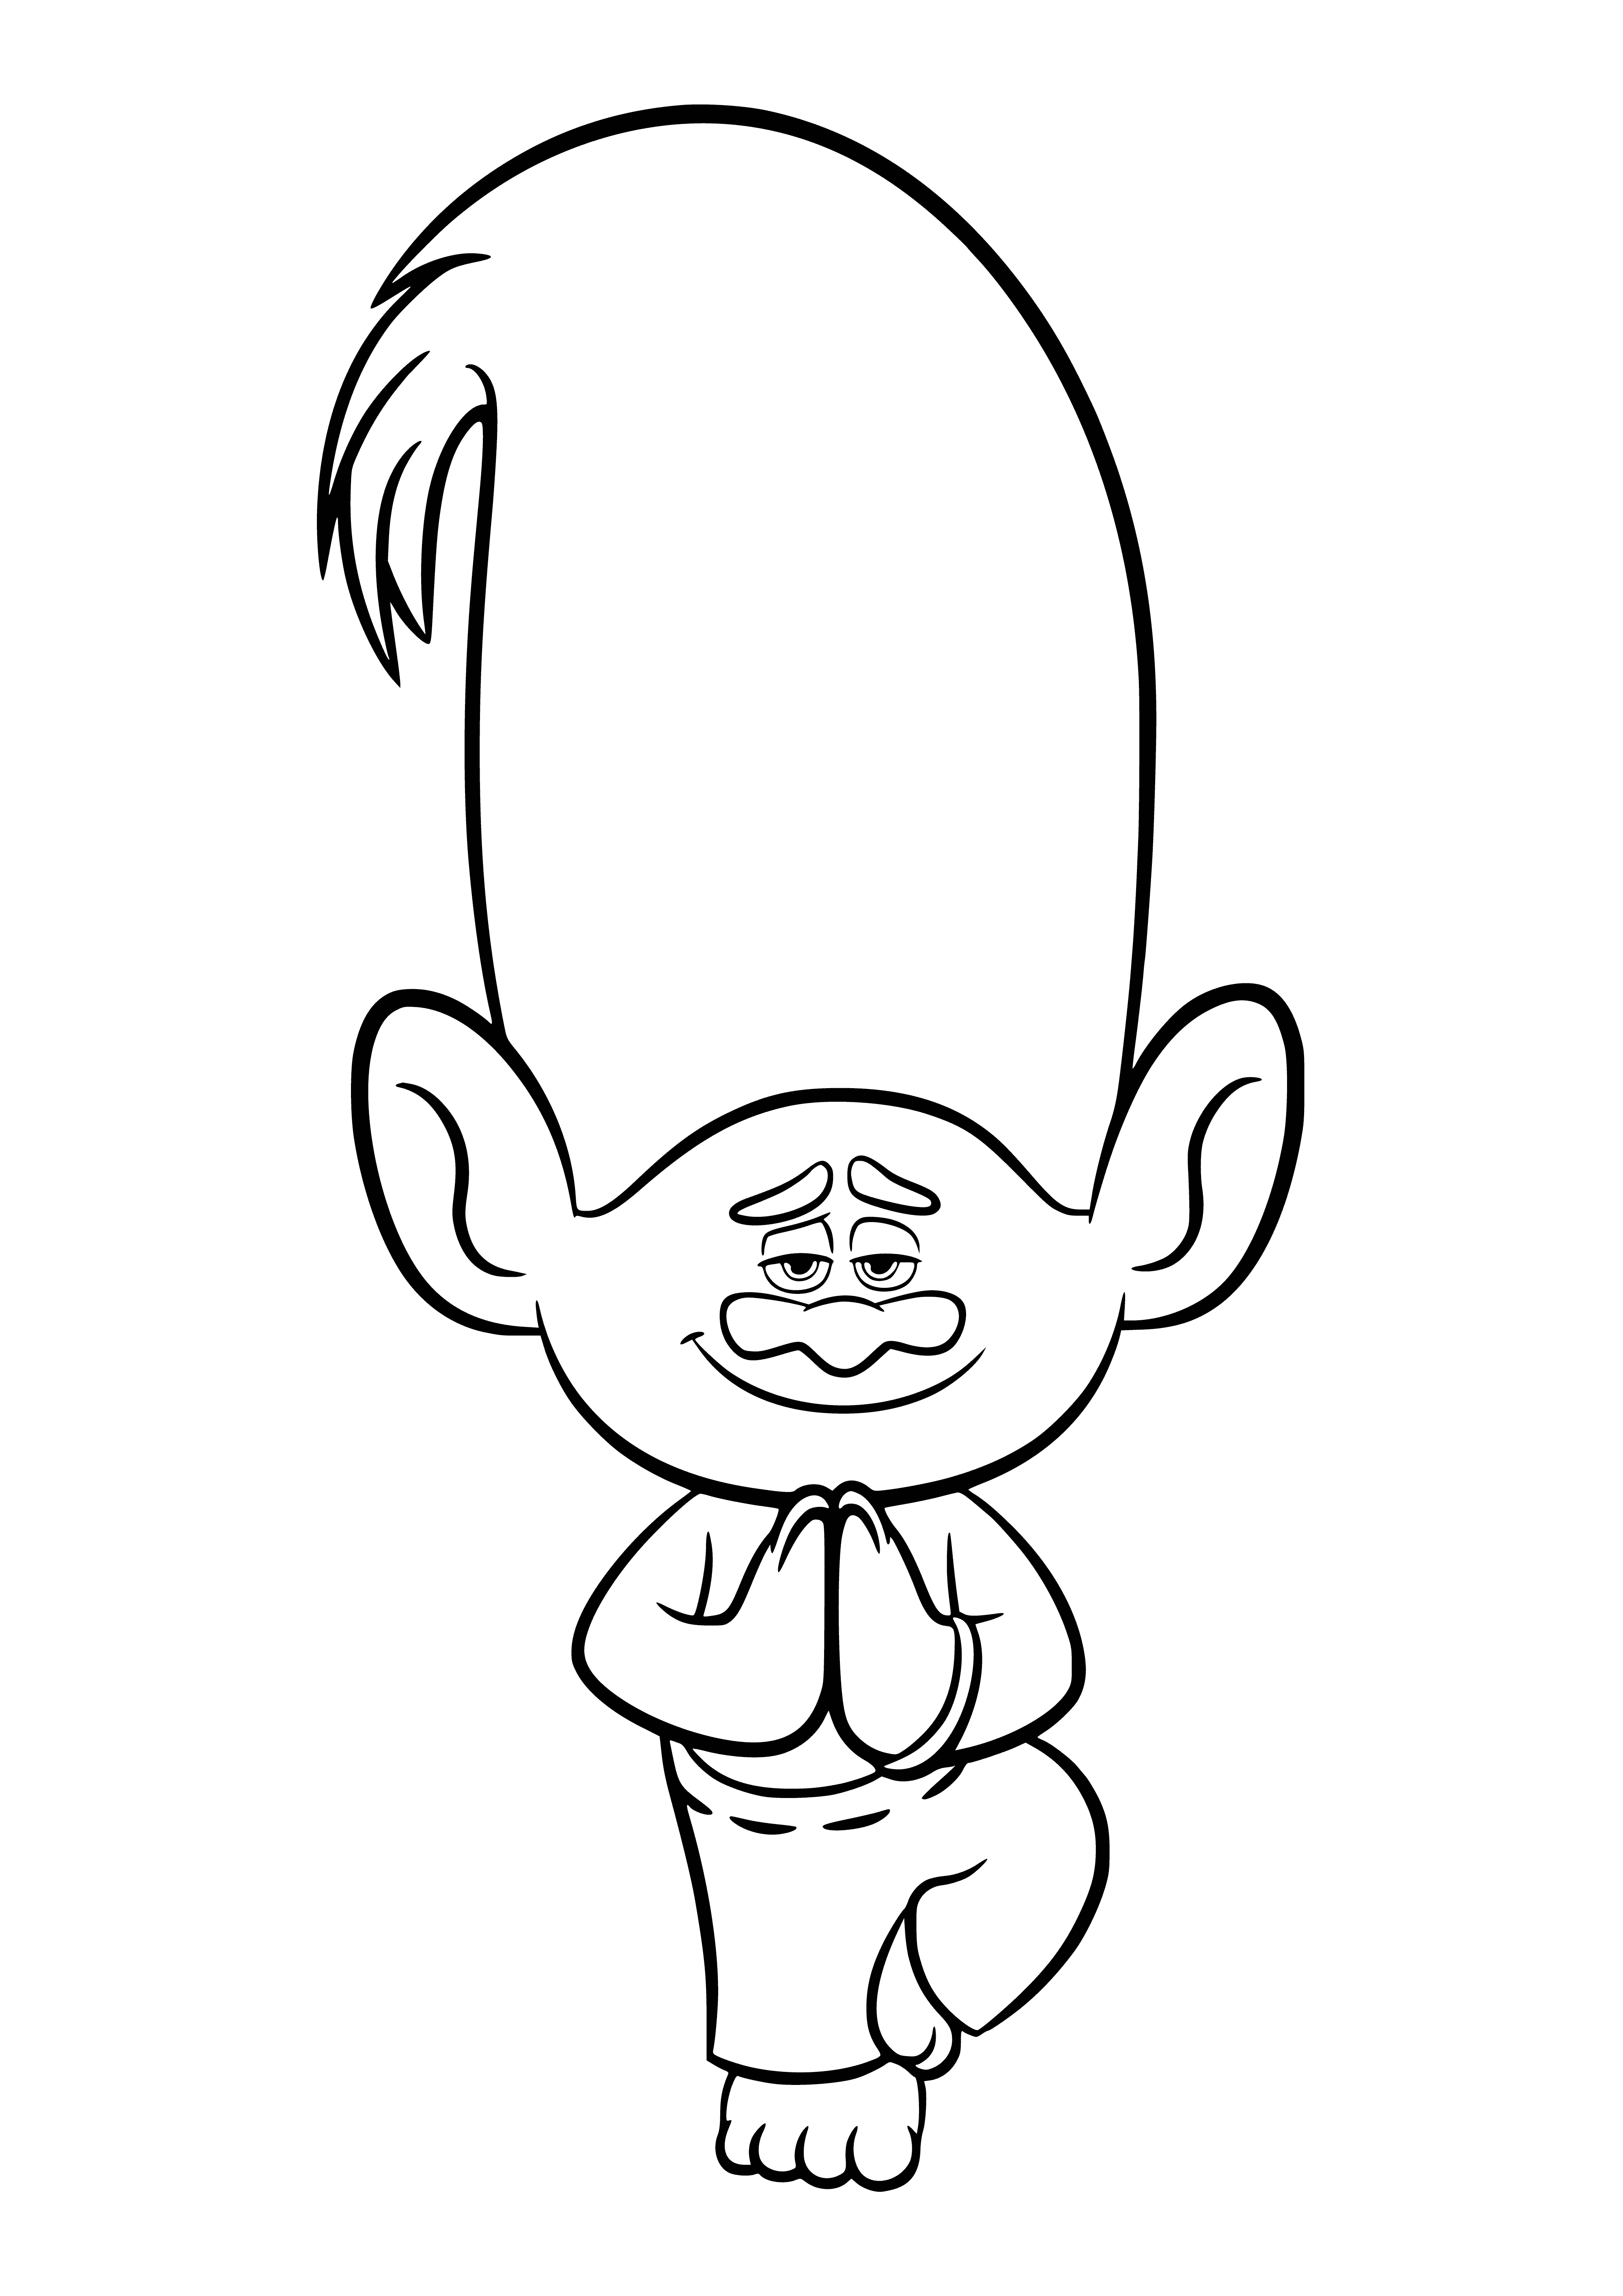 coloring page: Troll Brook is home to a variety of trolls with unique features who love to cause mischief!